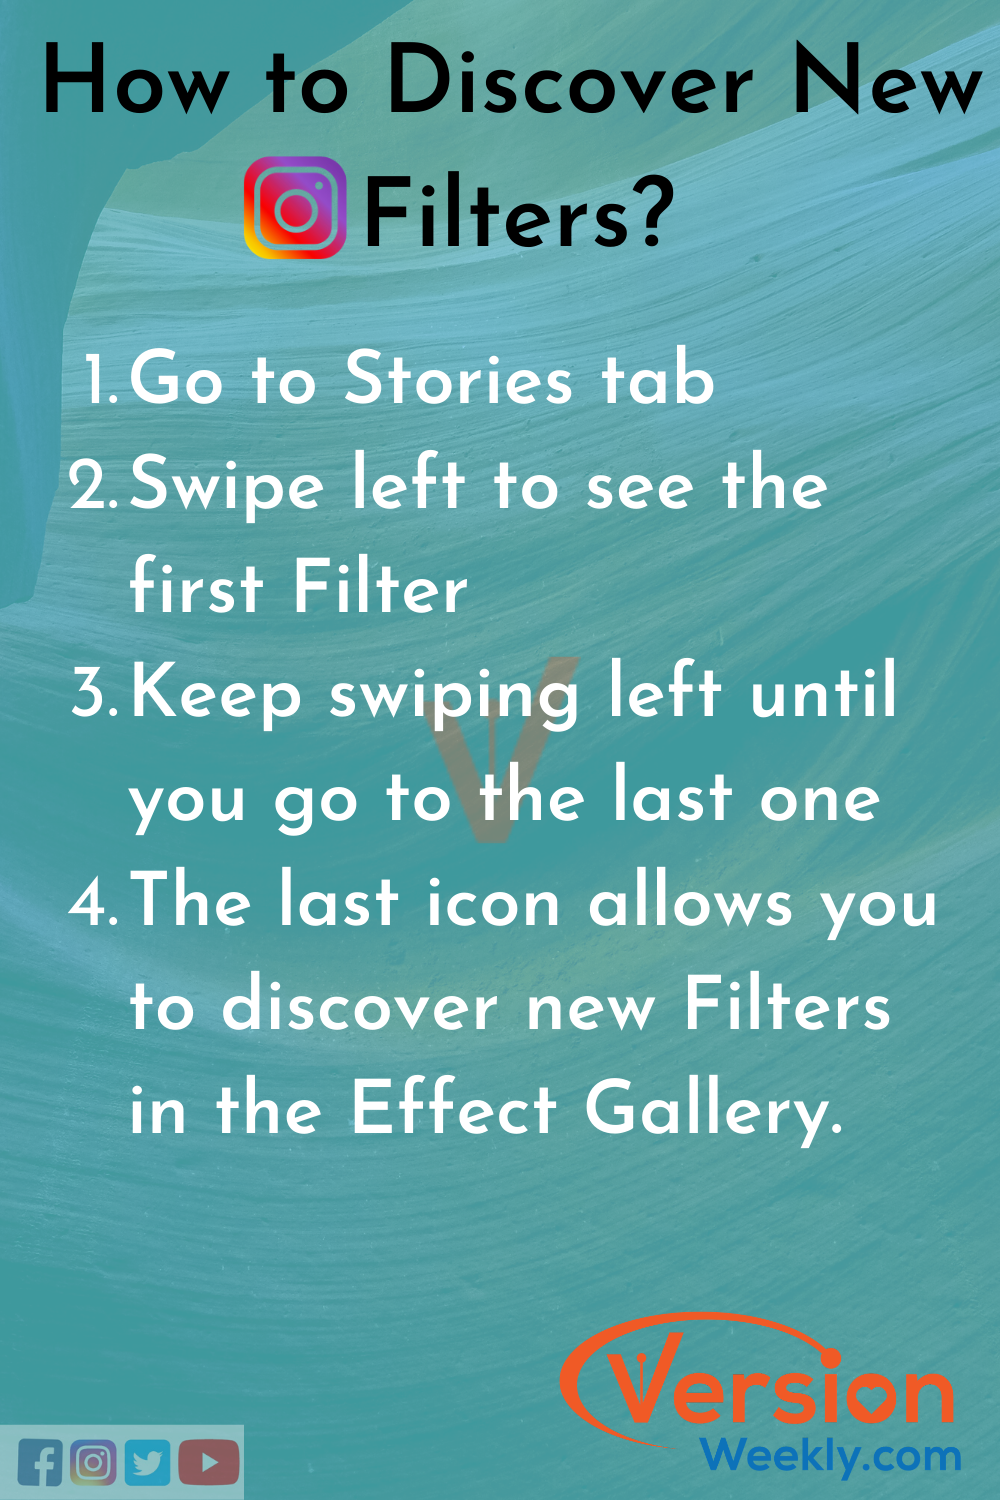 How to find new IG filters for stories